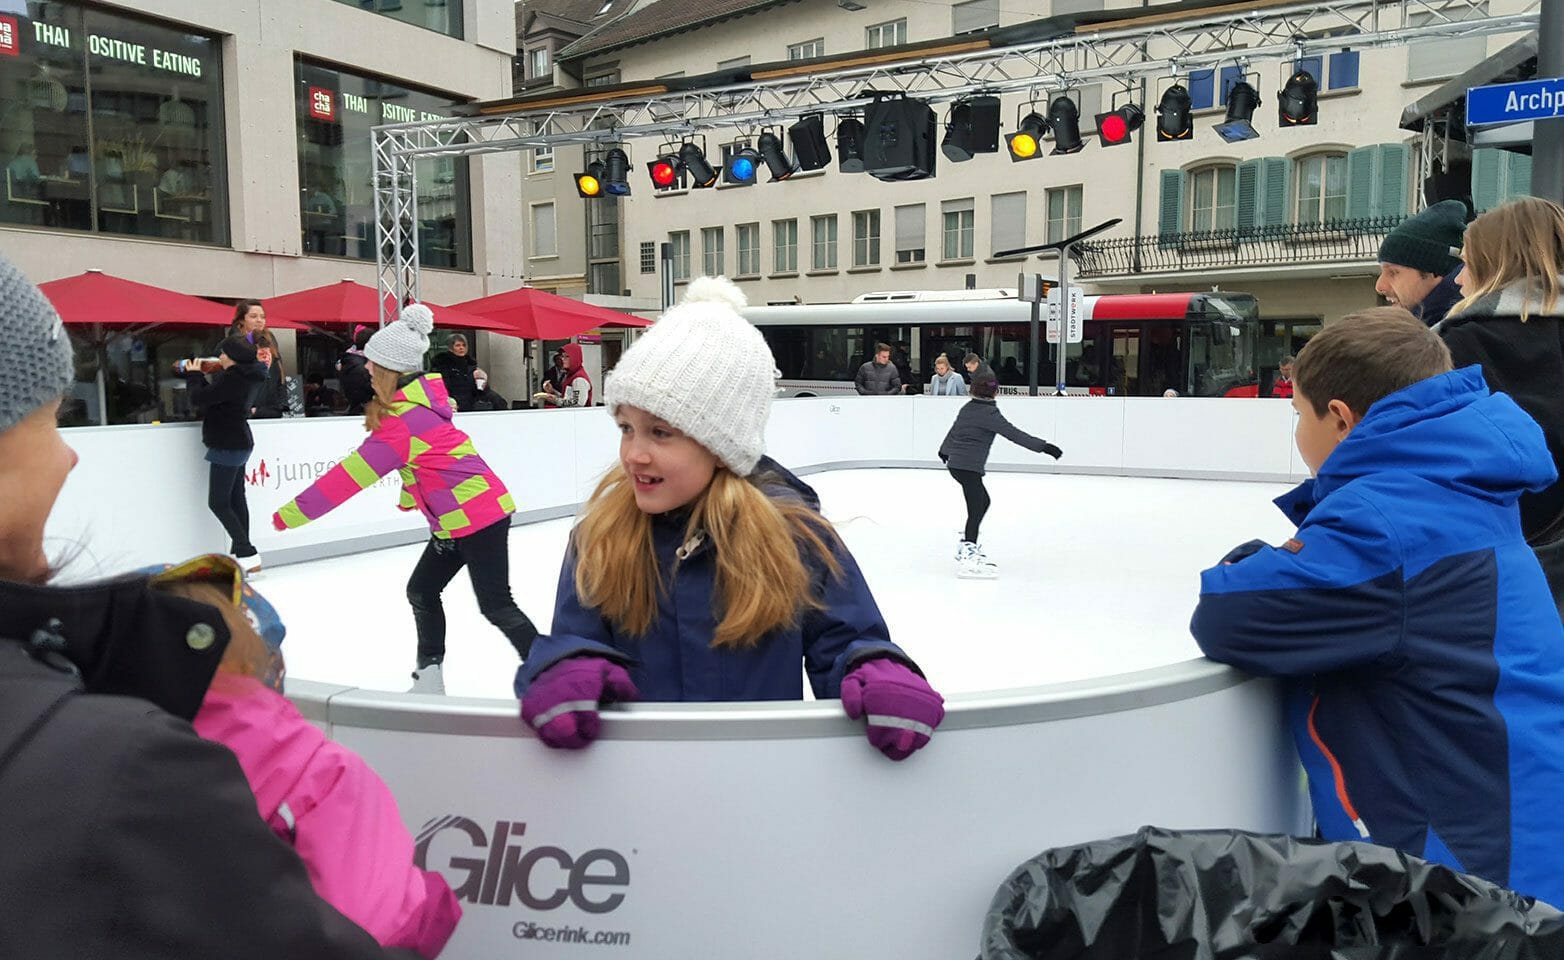 Kids on a Christmas synthetic ice rink in Swiss town center